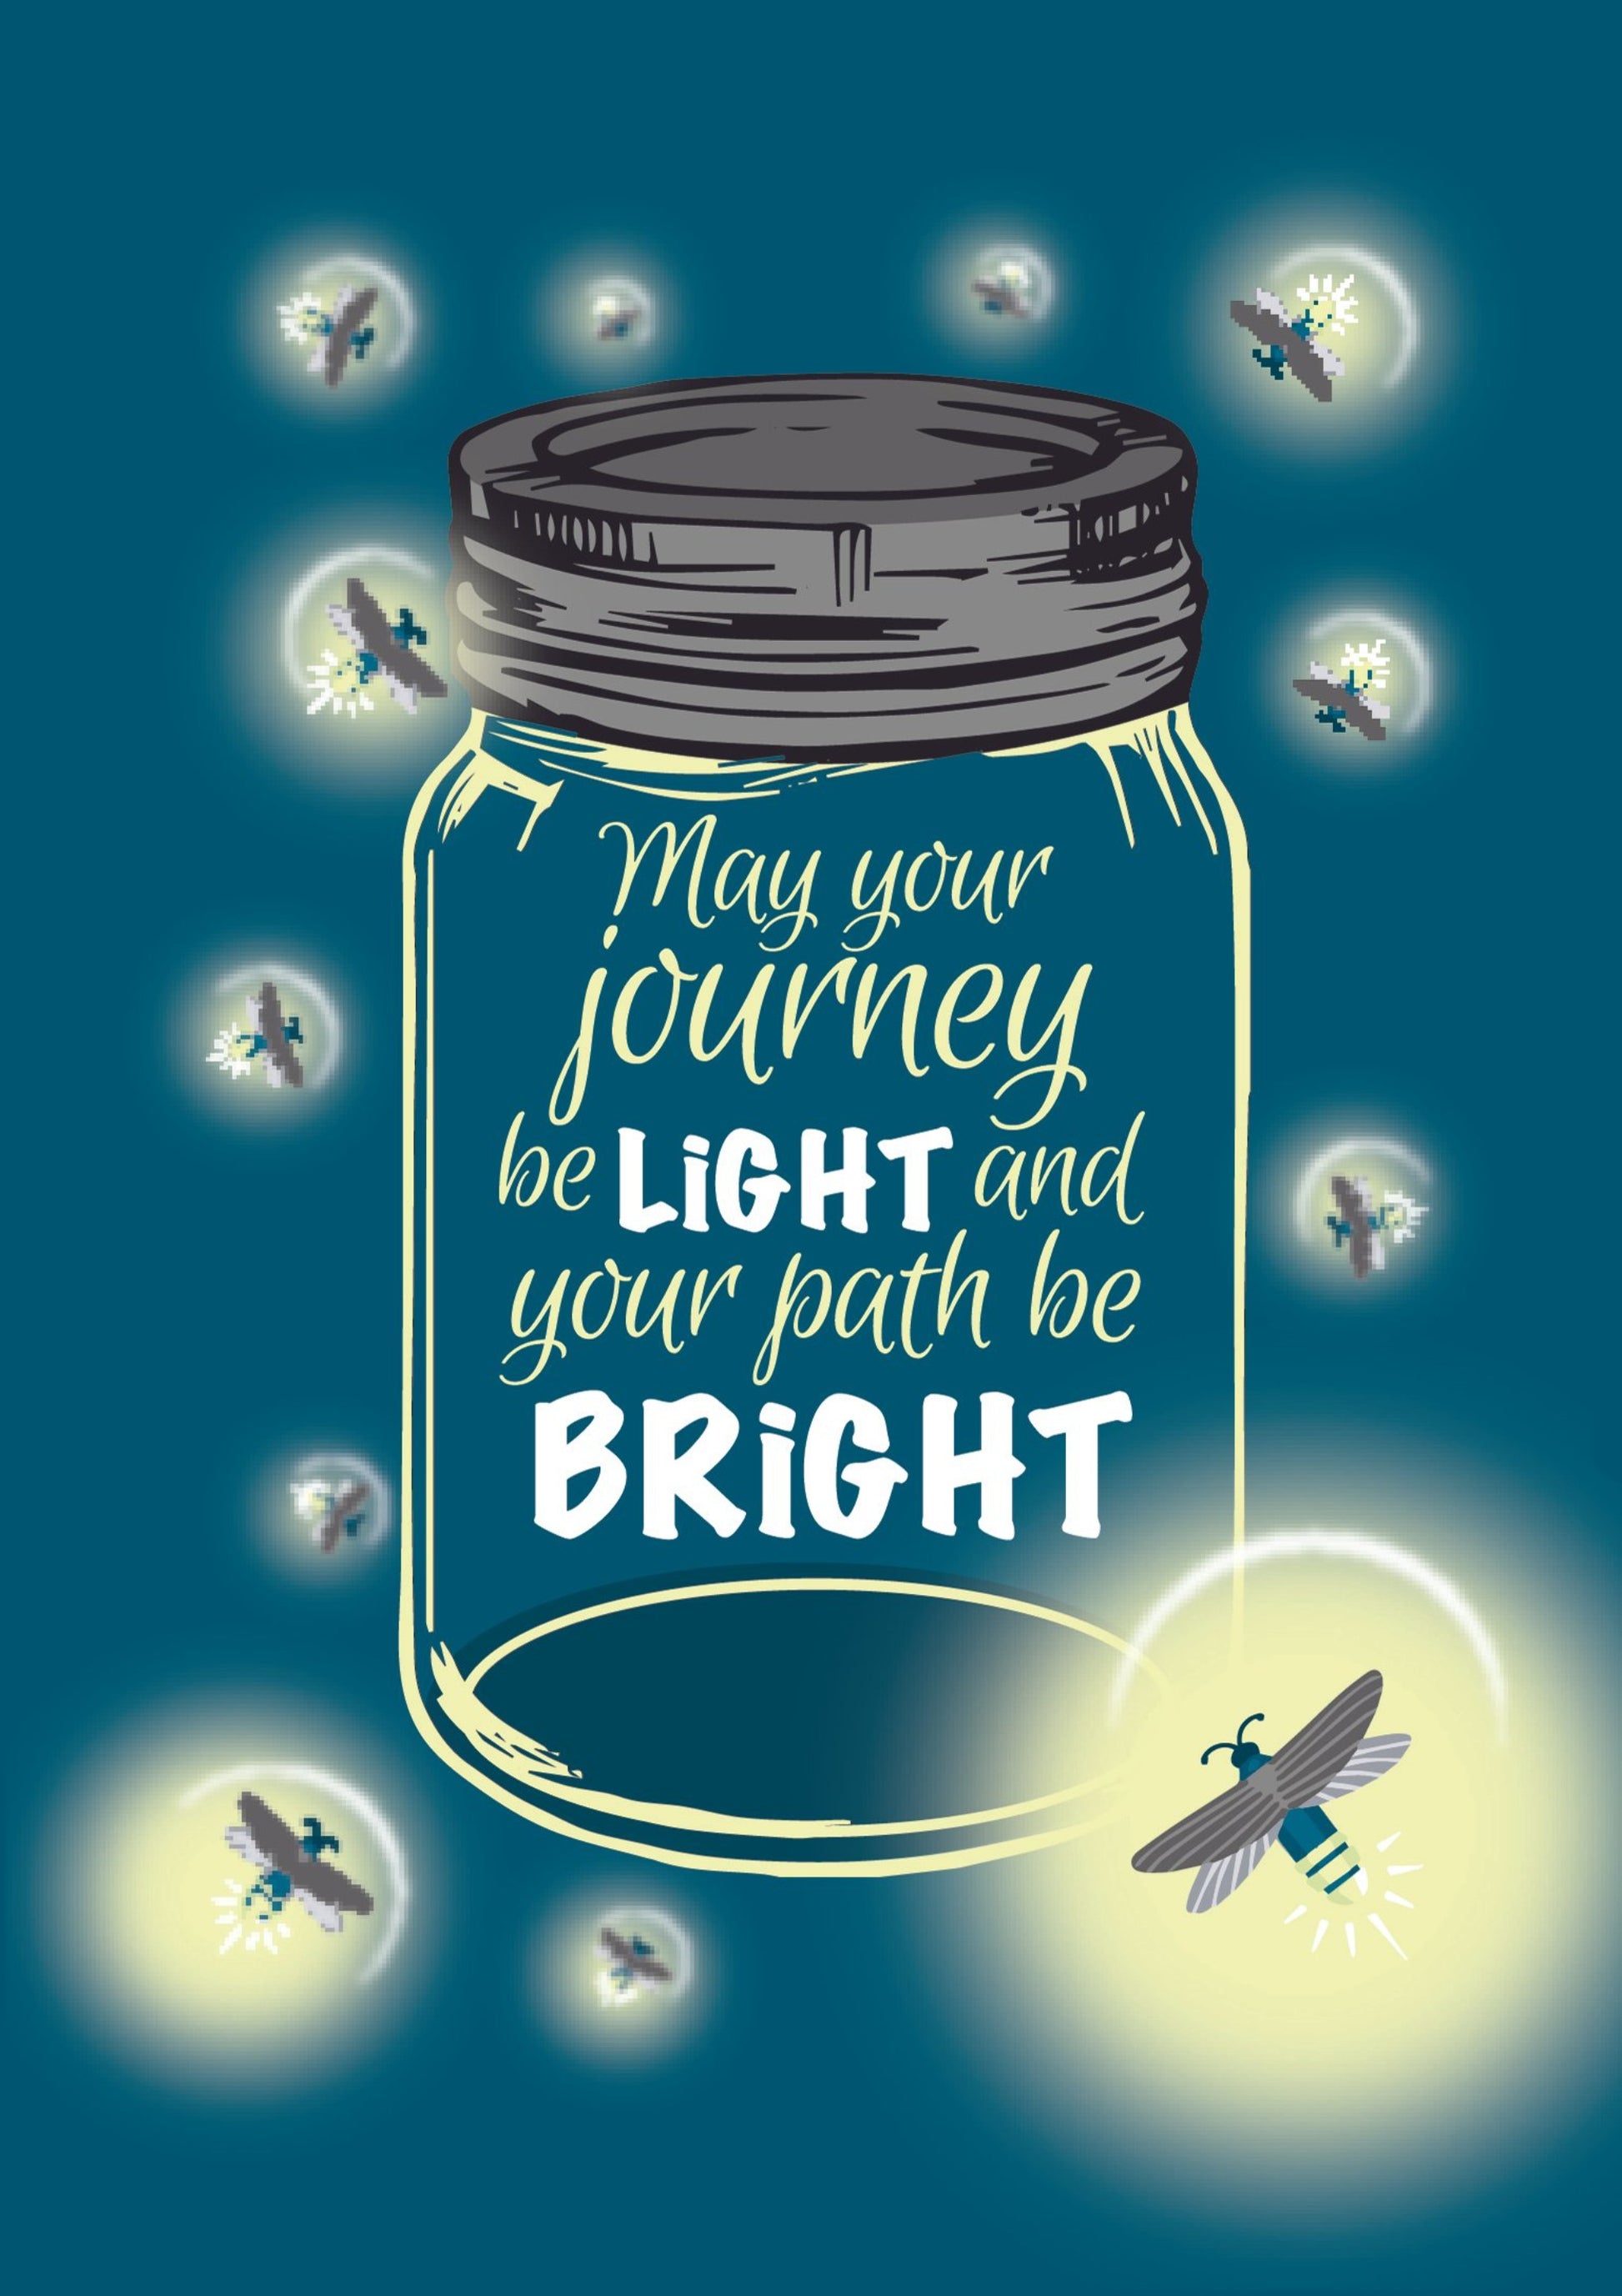 May Your Journey Be Light And Your Path Be Bright - Lighting Bug- Thinking Of You Greeting Card.